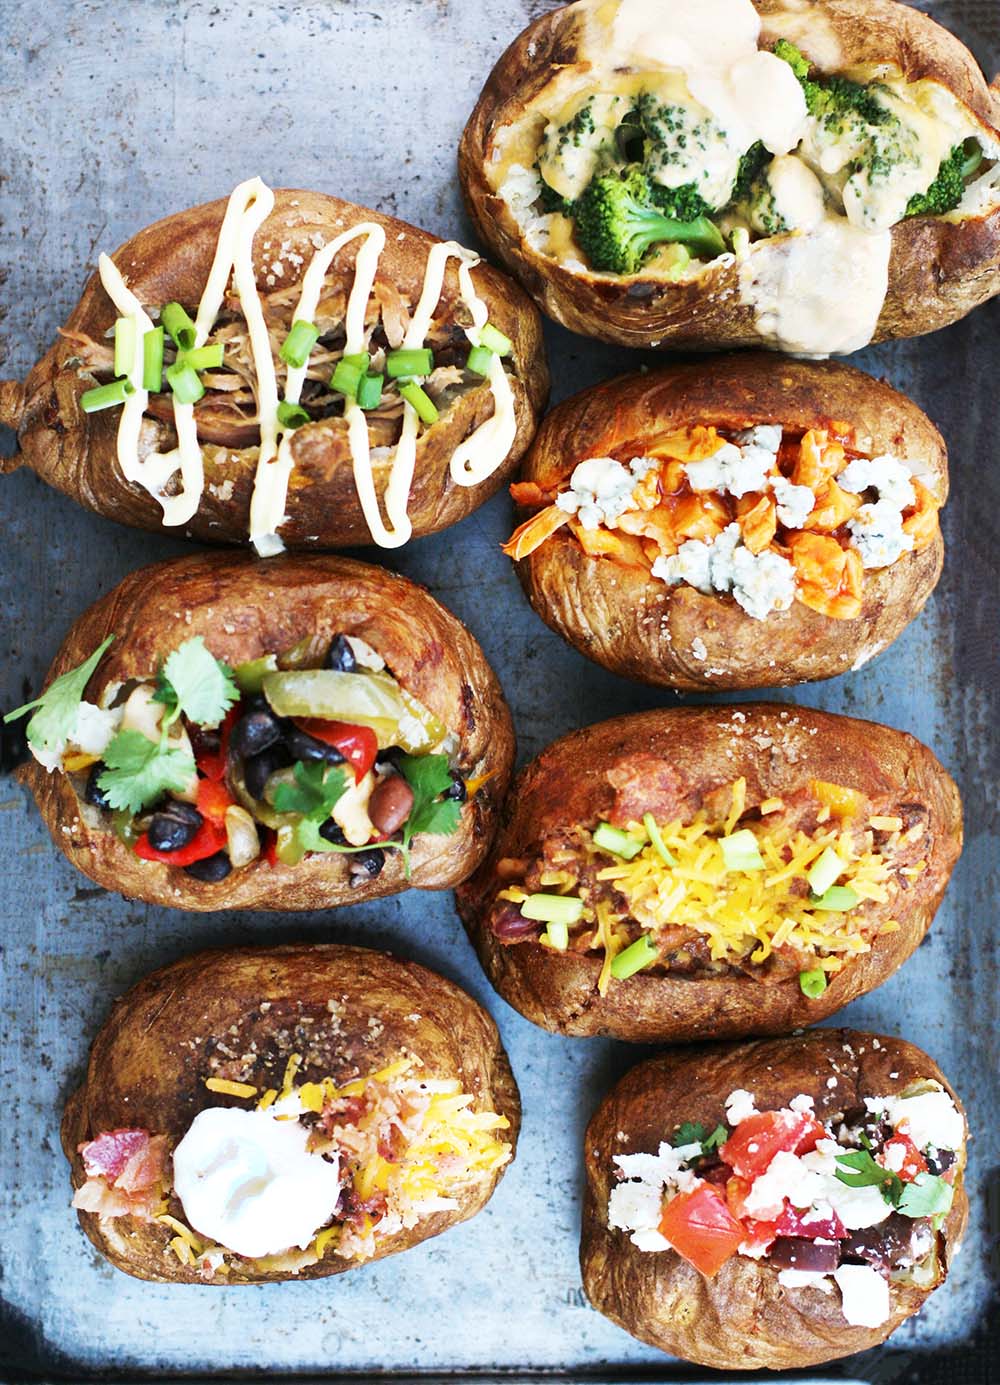 7 inexpensive loaded baked potato ideas: Start with a perfectly baked potato and add delicious toppings!